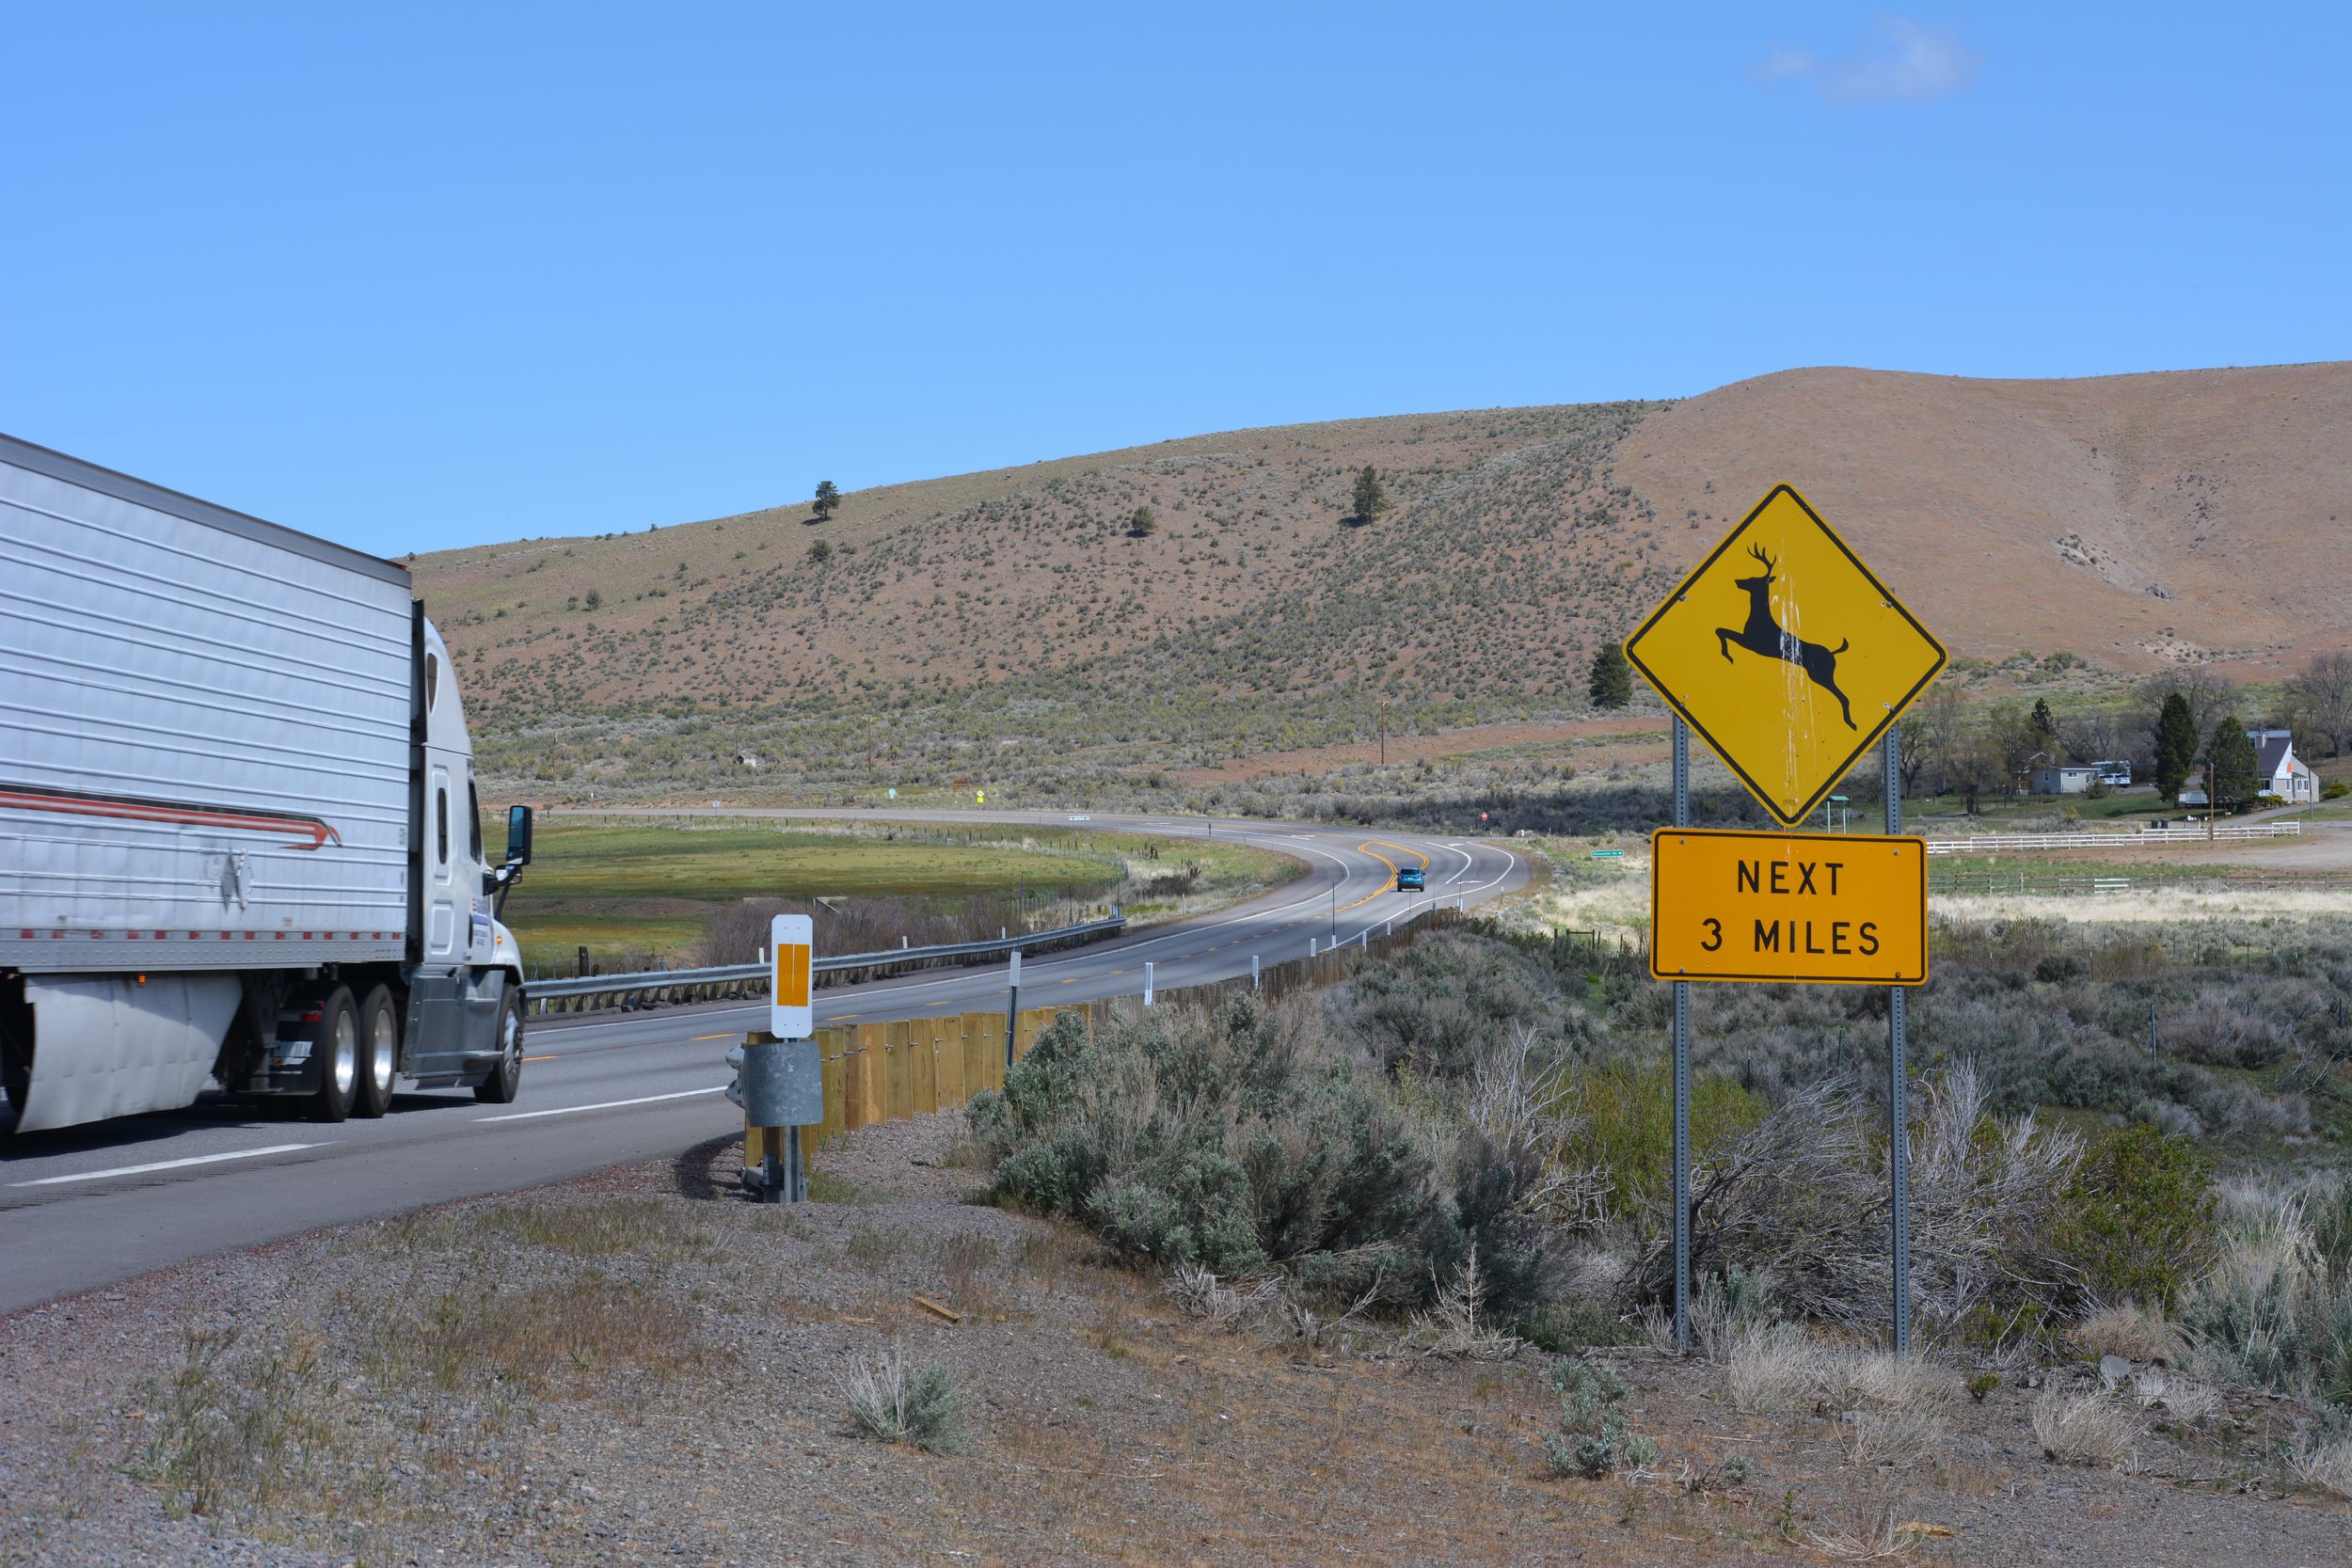  Ron and I explored a stretch of Highway 395 north of our study area, extending from Janesville to Susanville, California, which is considered one of the worst roadkill hotspots in the state. 